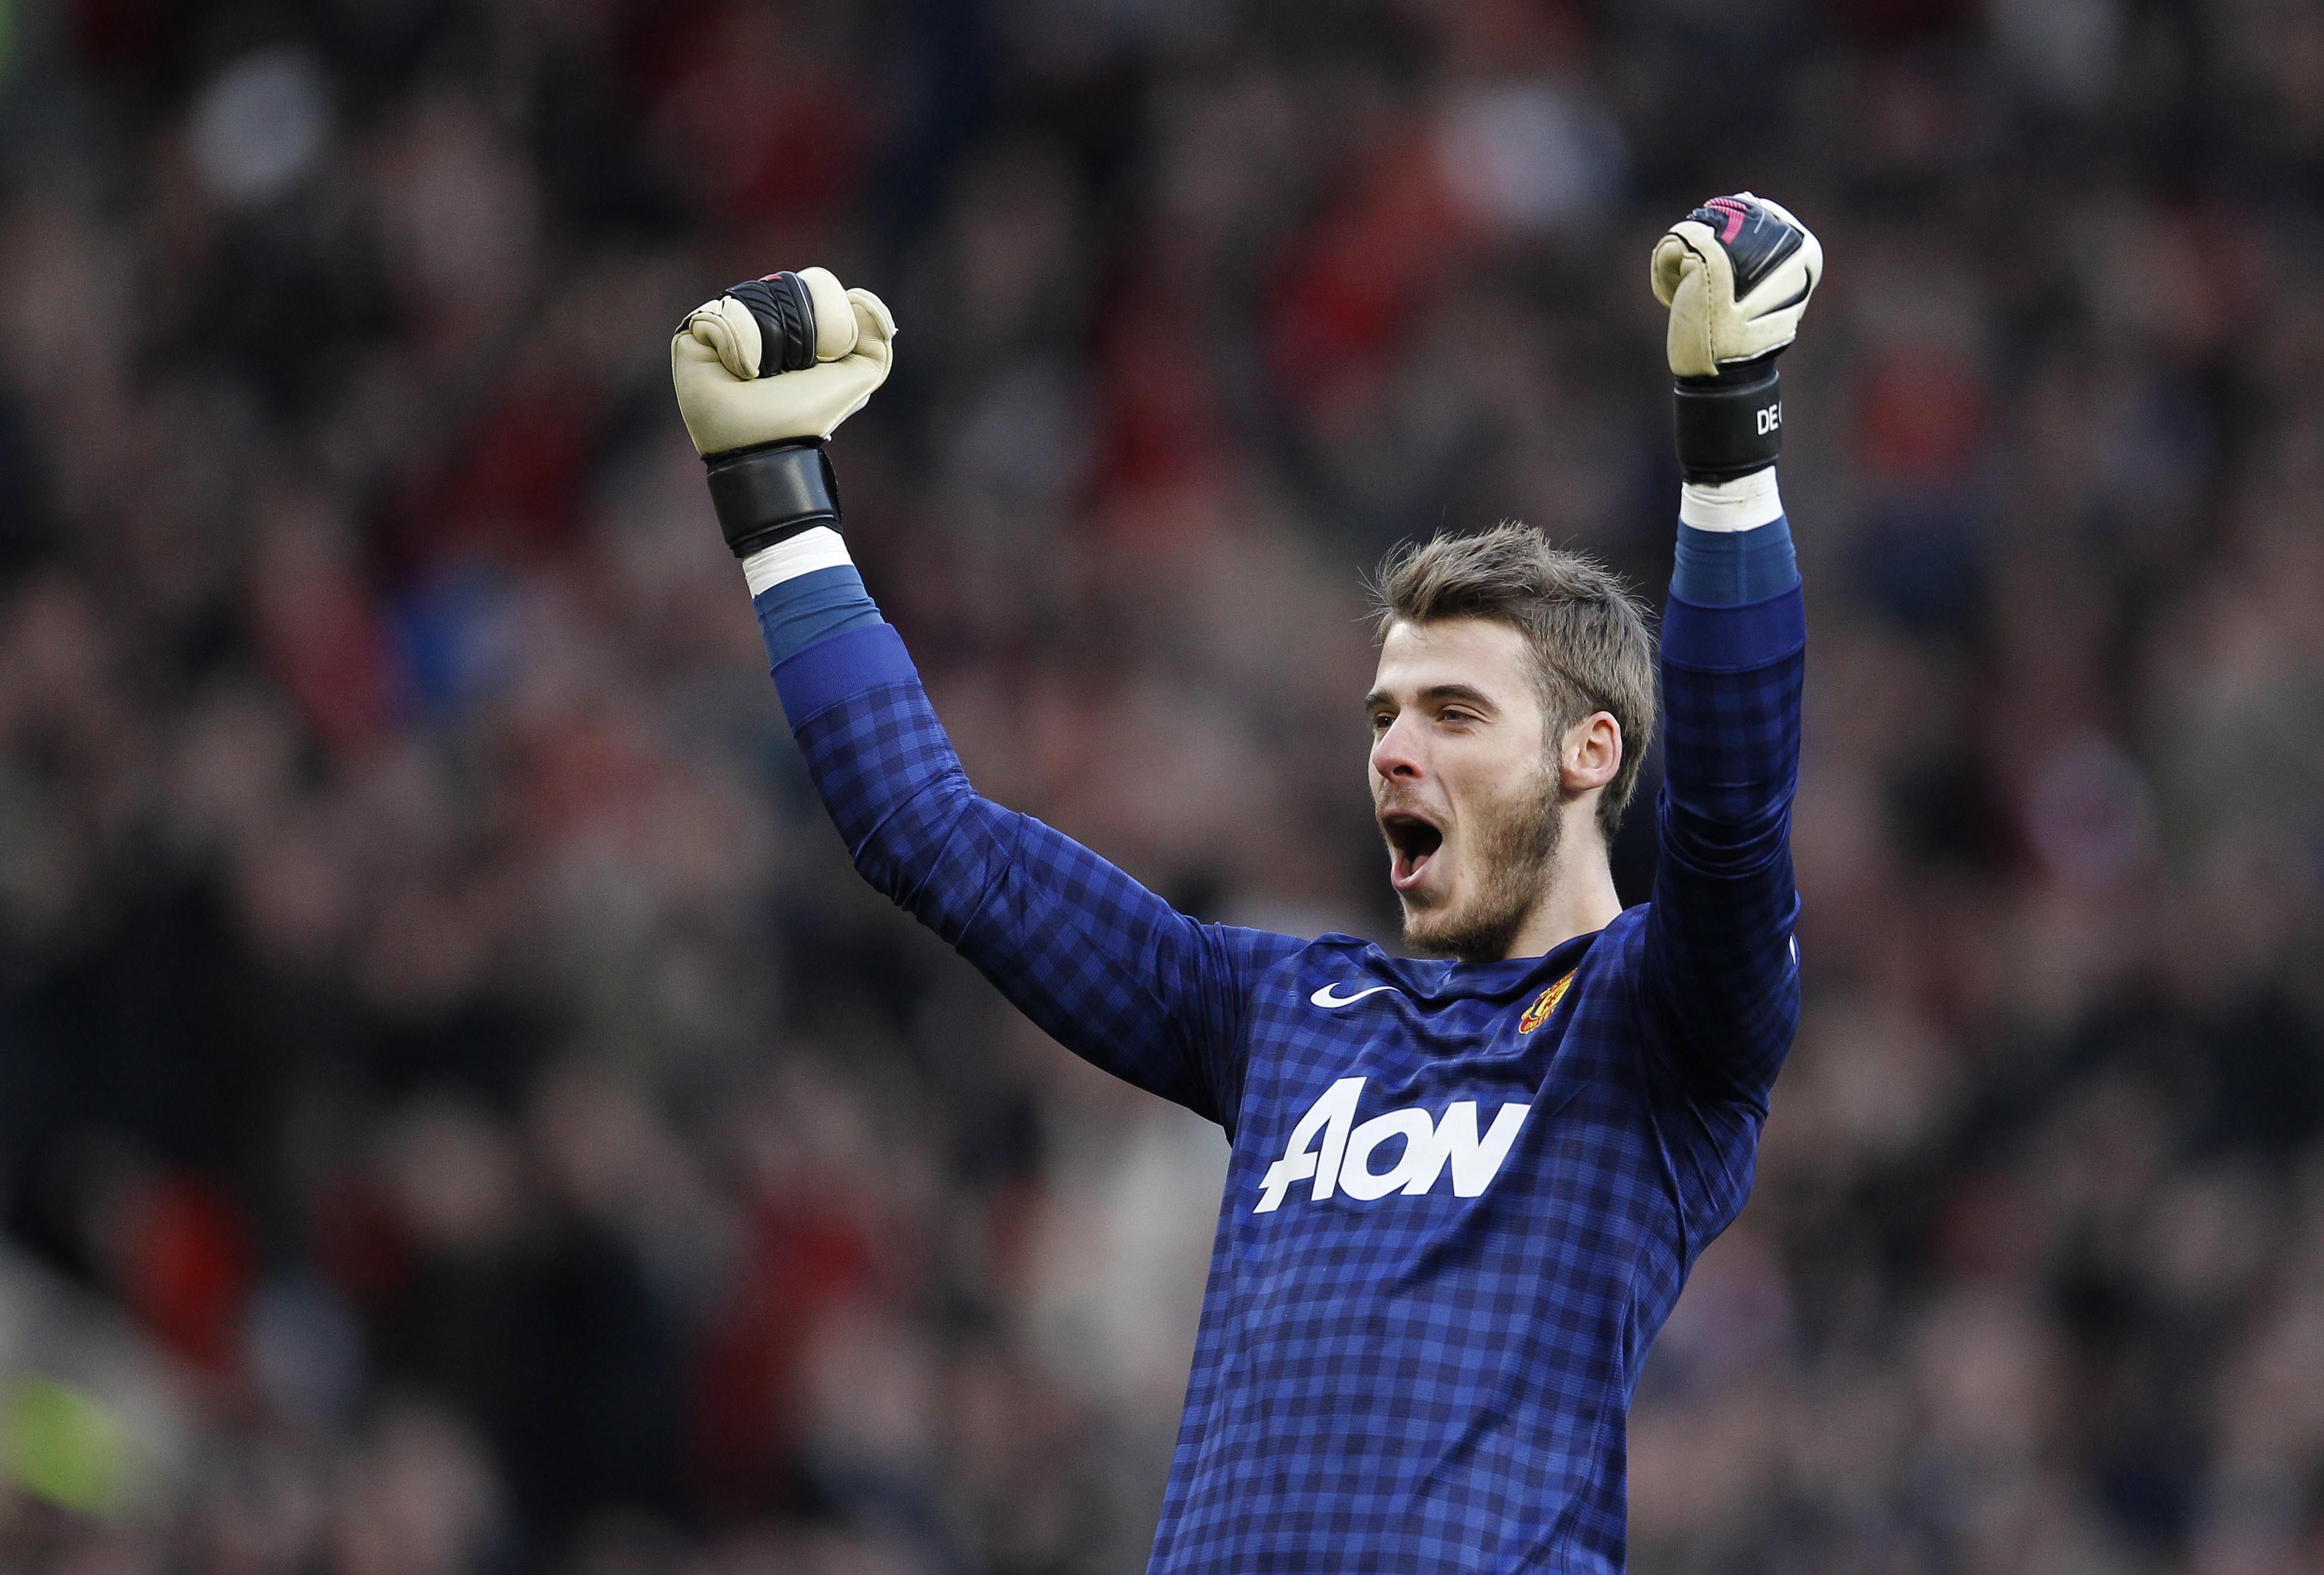 Manchester United David De Gea after the game wallpapers and other